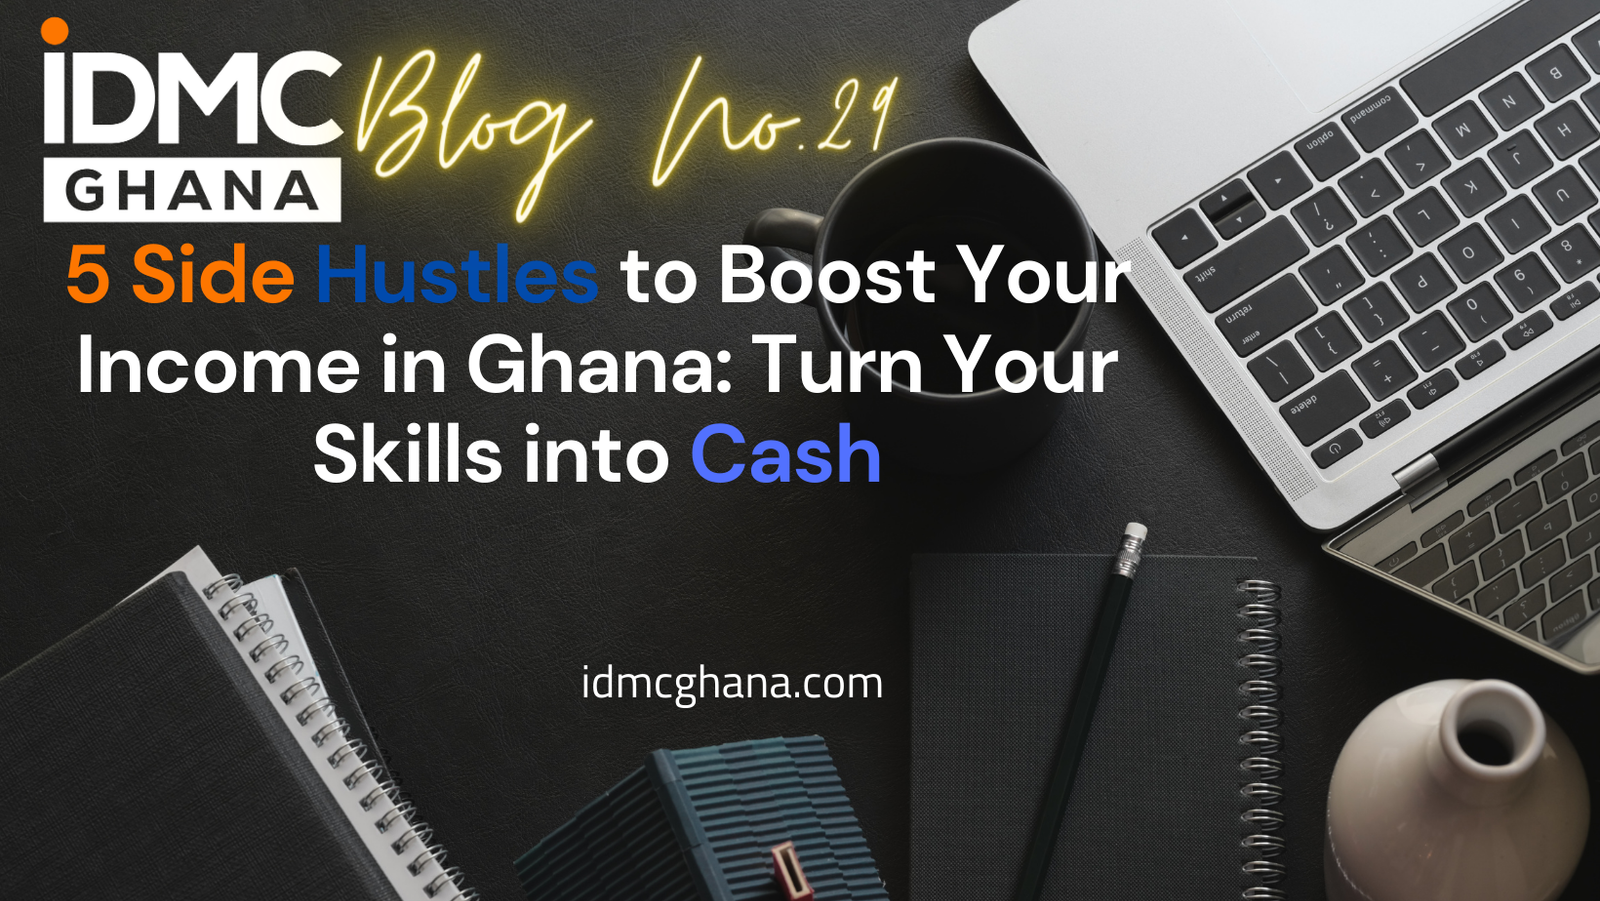 5 Side Hustles to Boost Your Income in Ghana Turn Your Skills into Cash